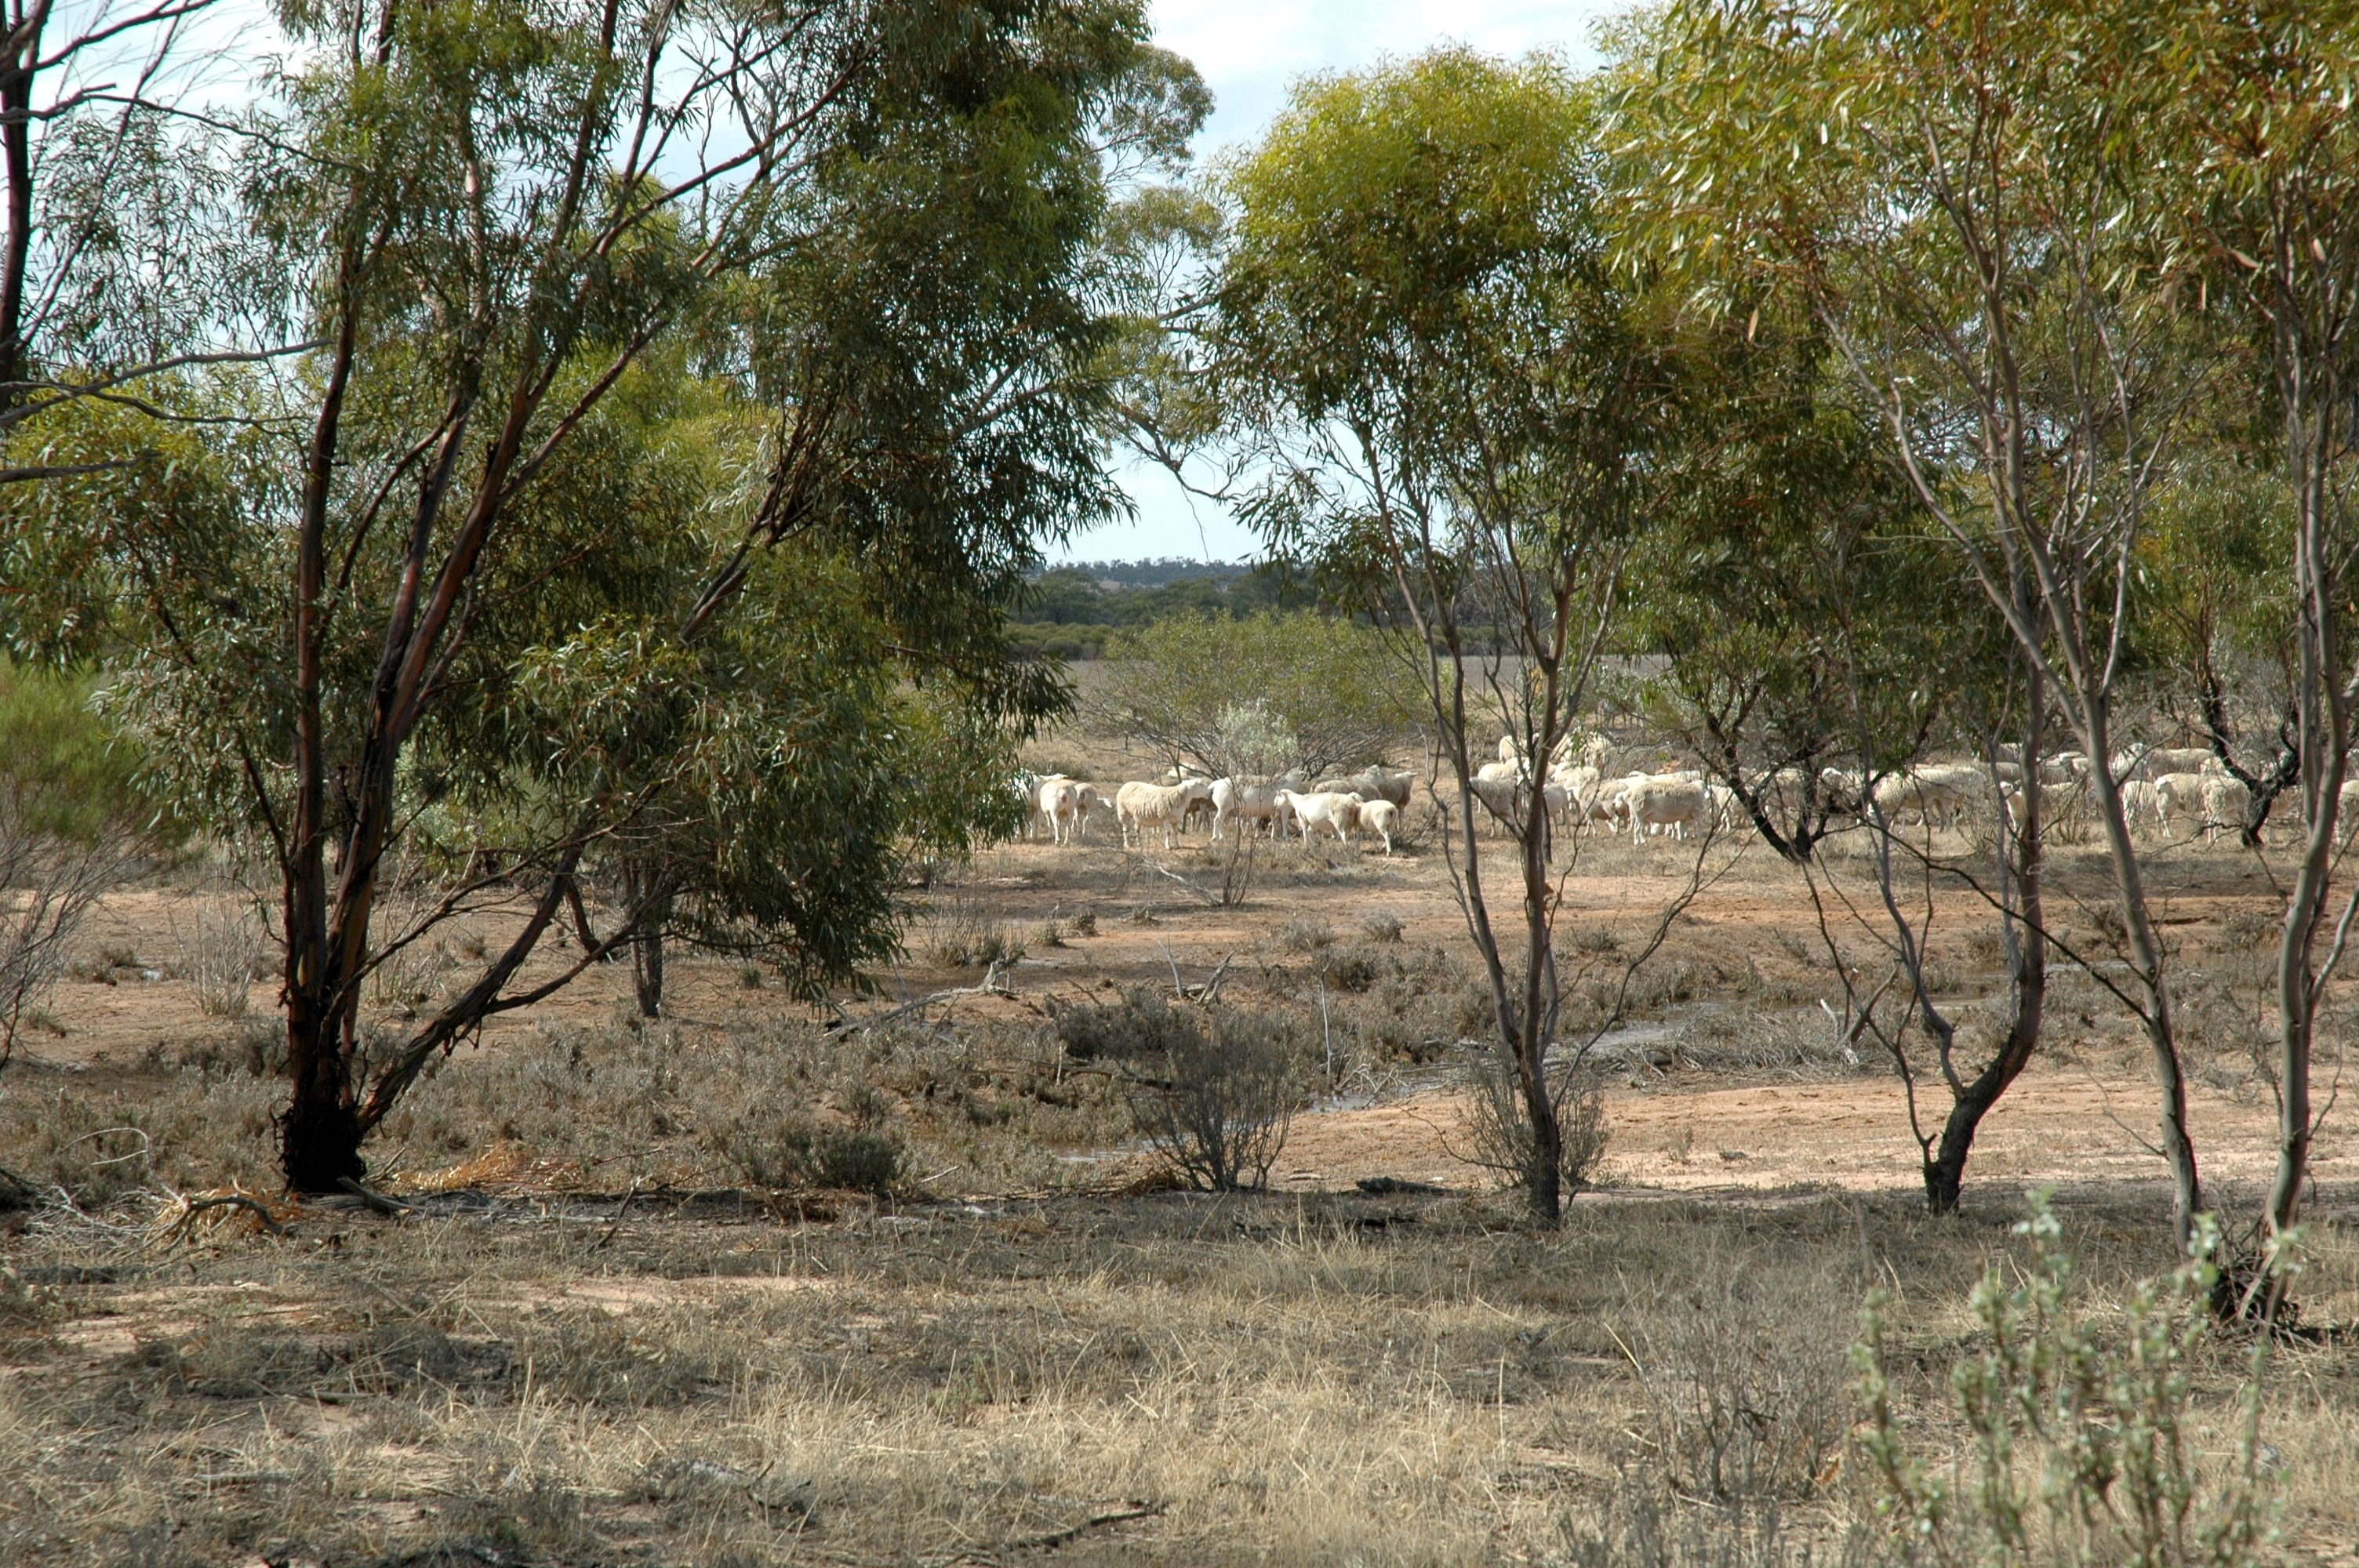 Sheep grazing in biodiverse agricultural system